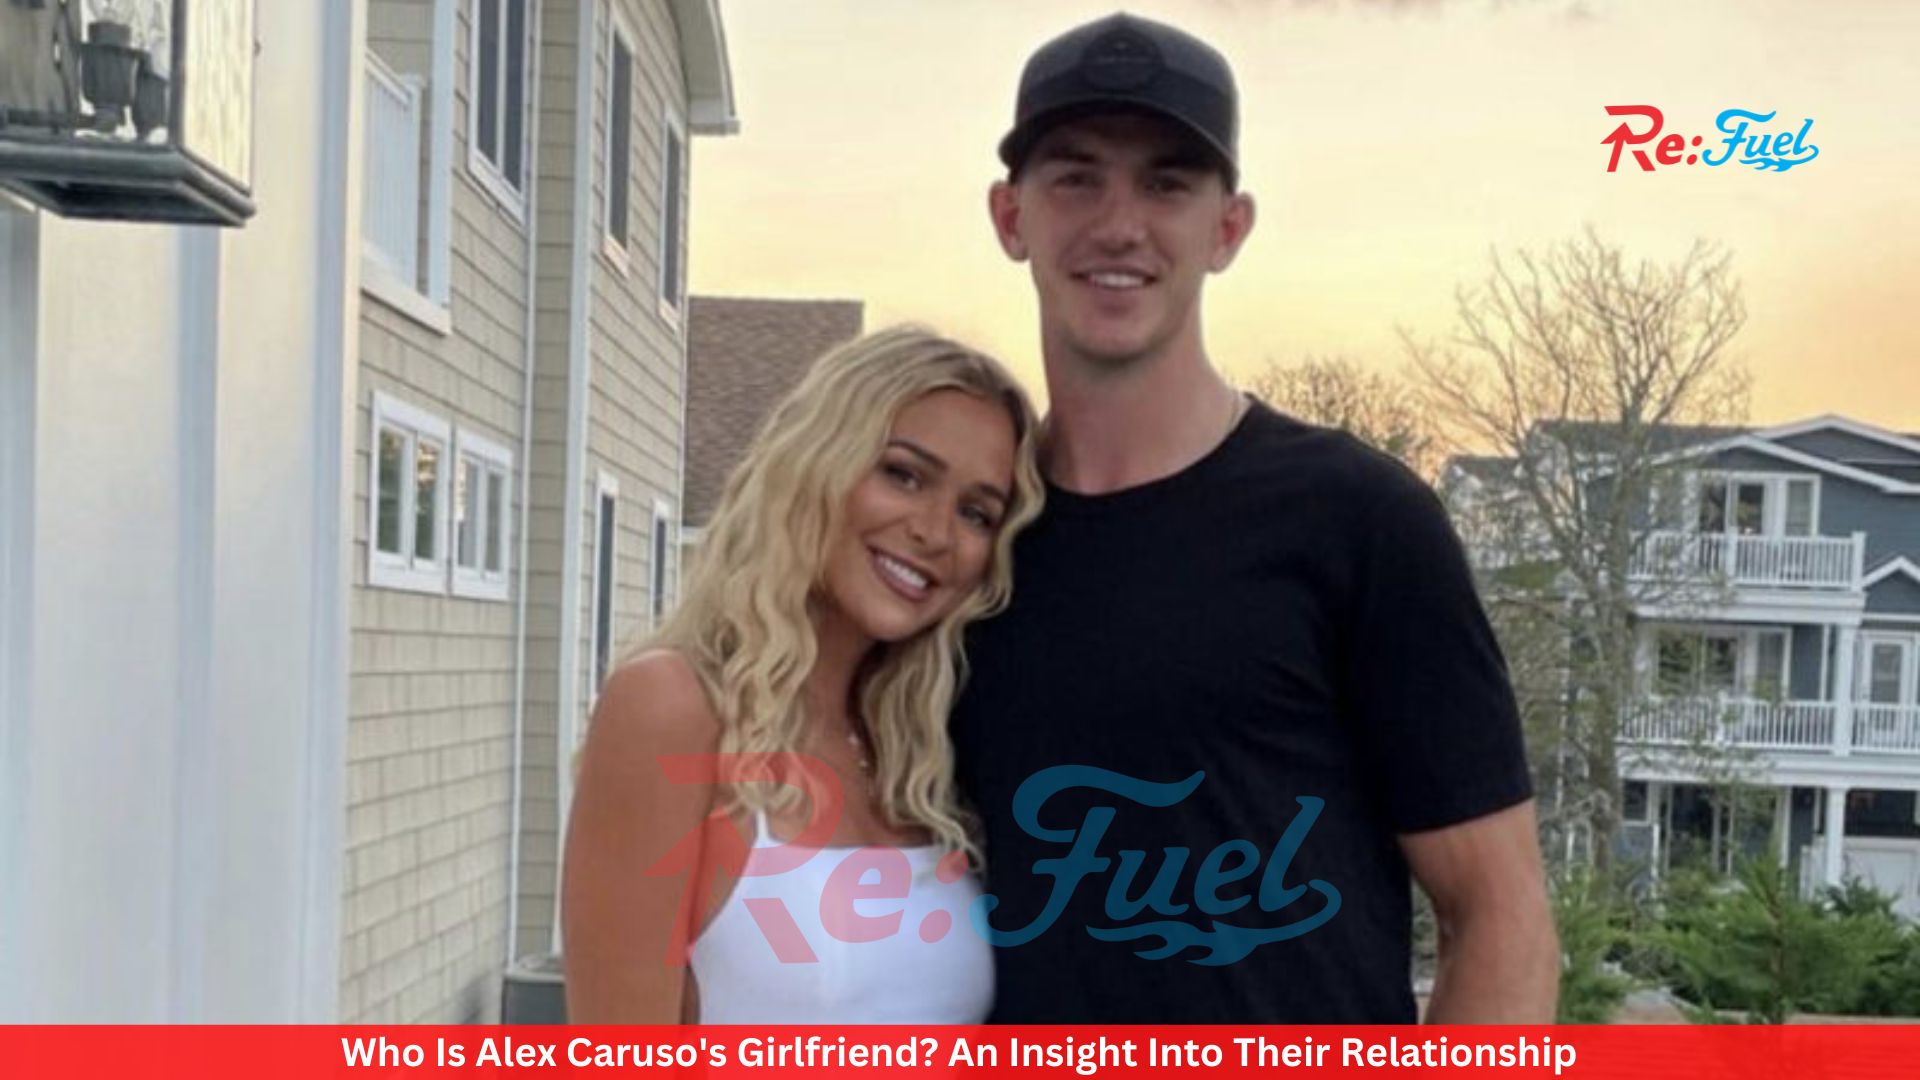 Who Is Alex Caruso's Girlfriend? An Insight Into Their Relationship